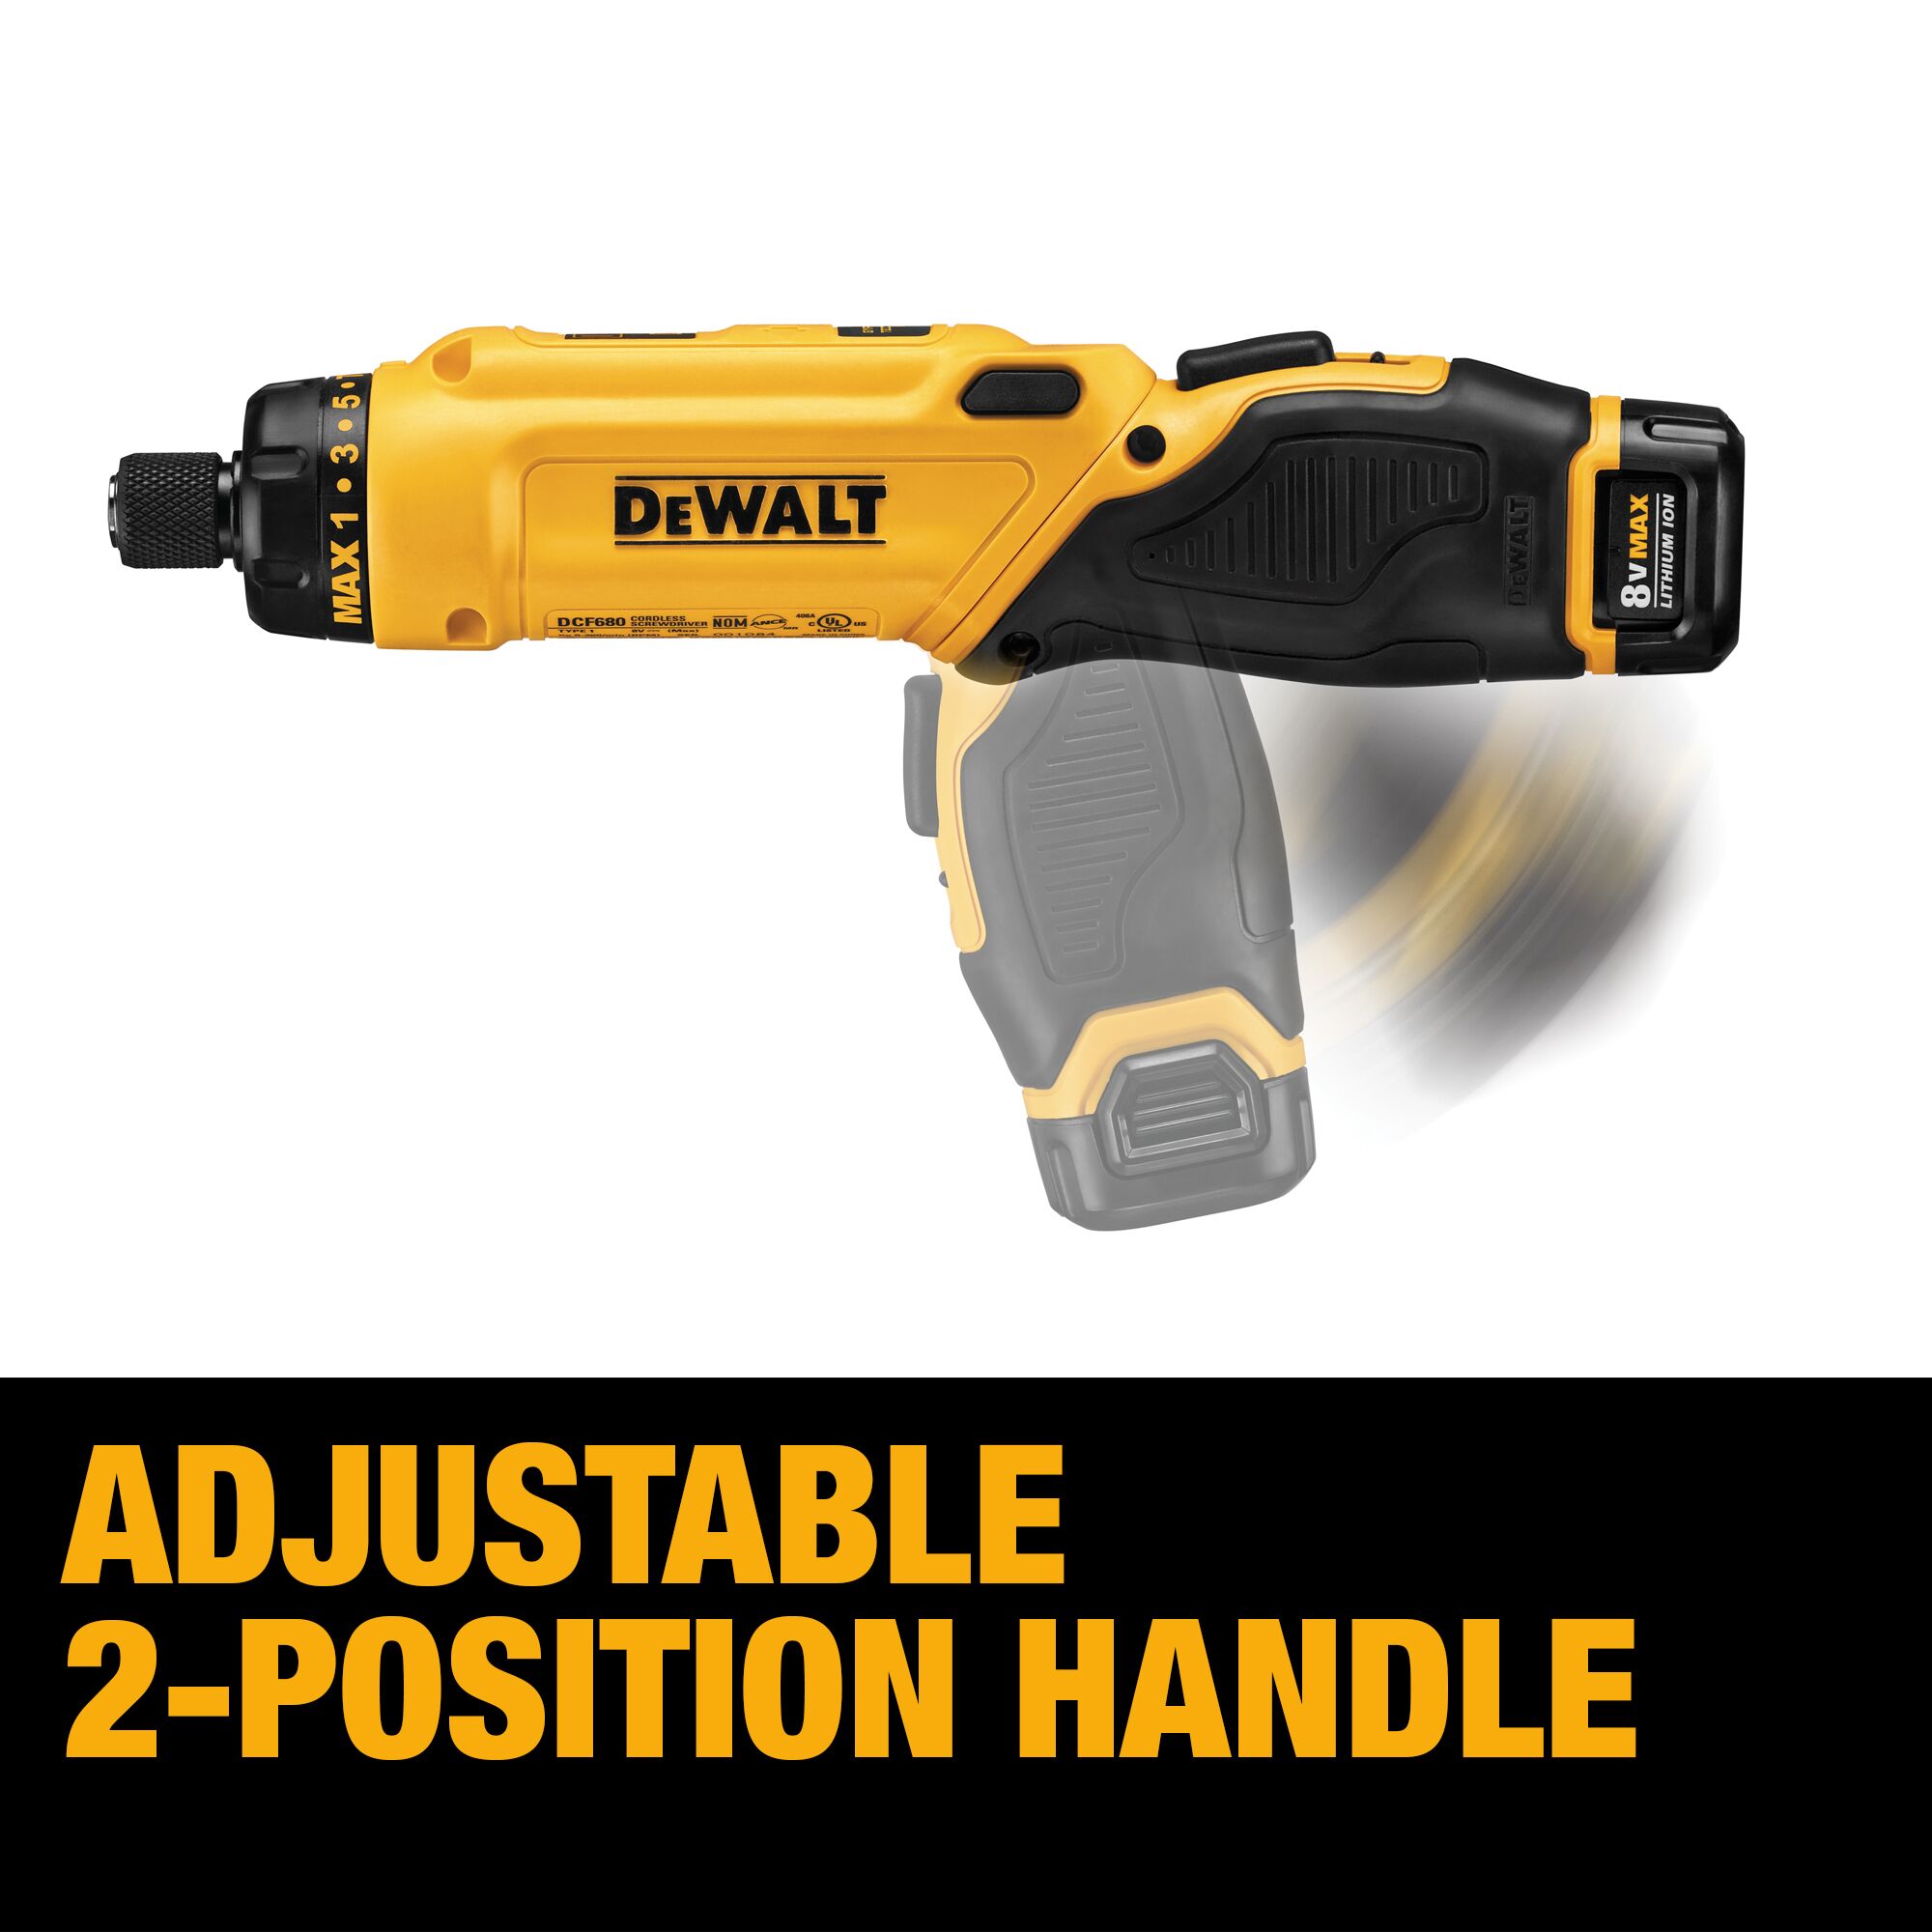 DEWALT 8-volt 1/4-in Cordless Screwdriver (1-Battery Included and